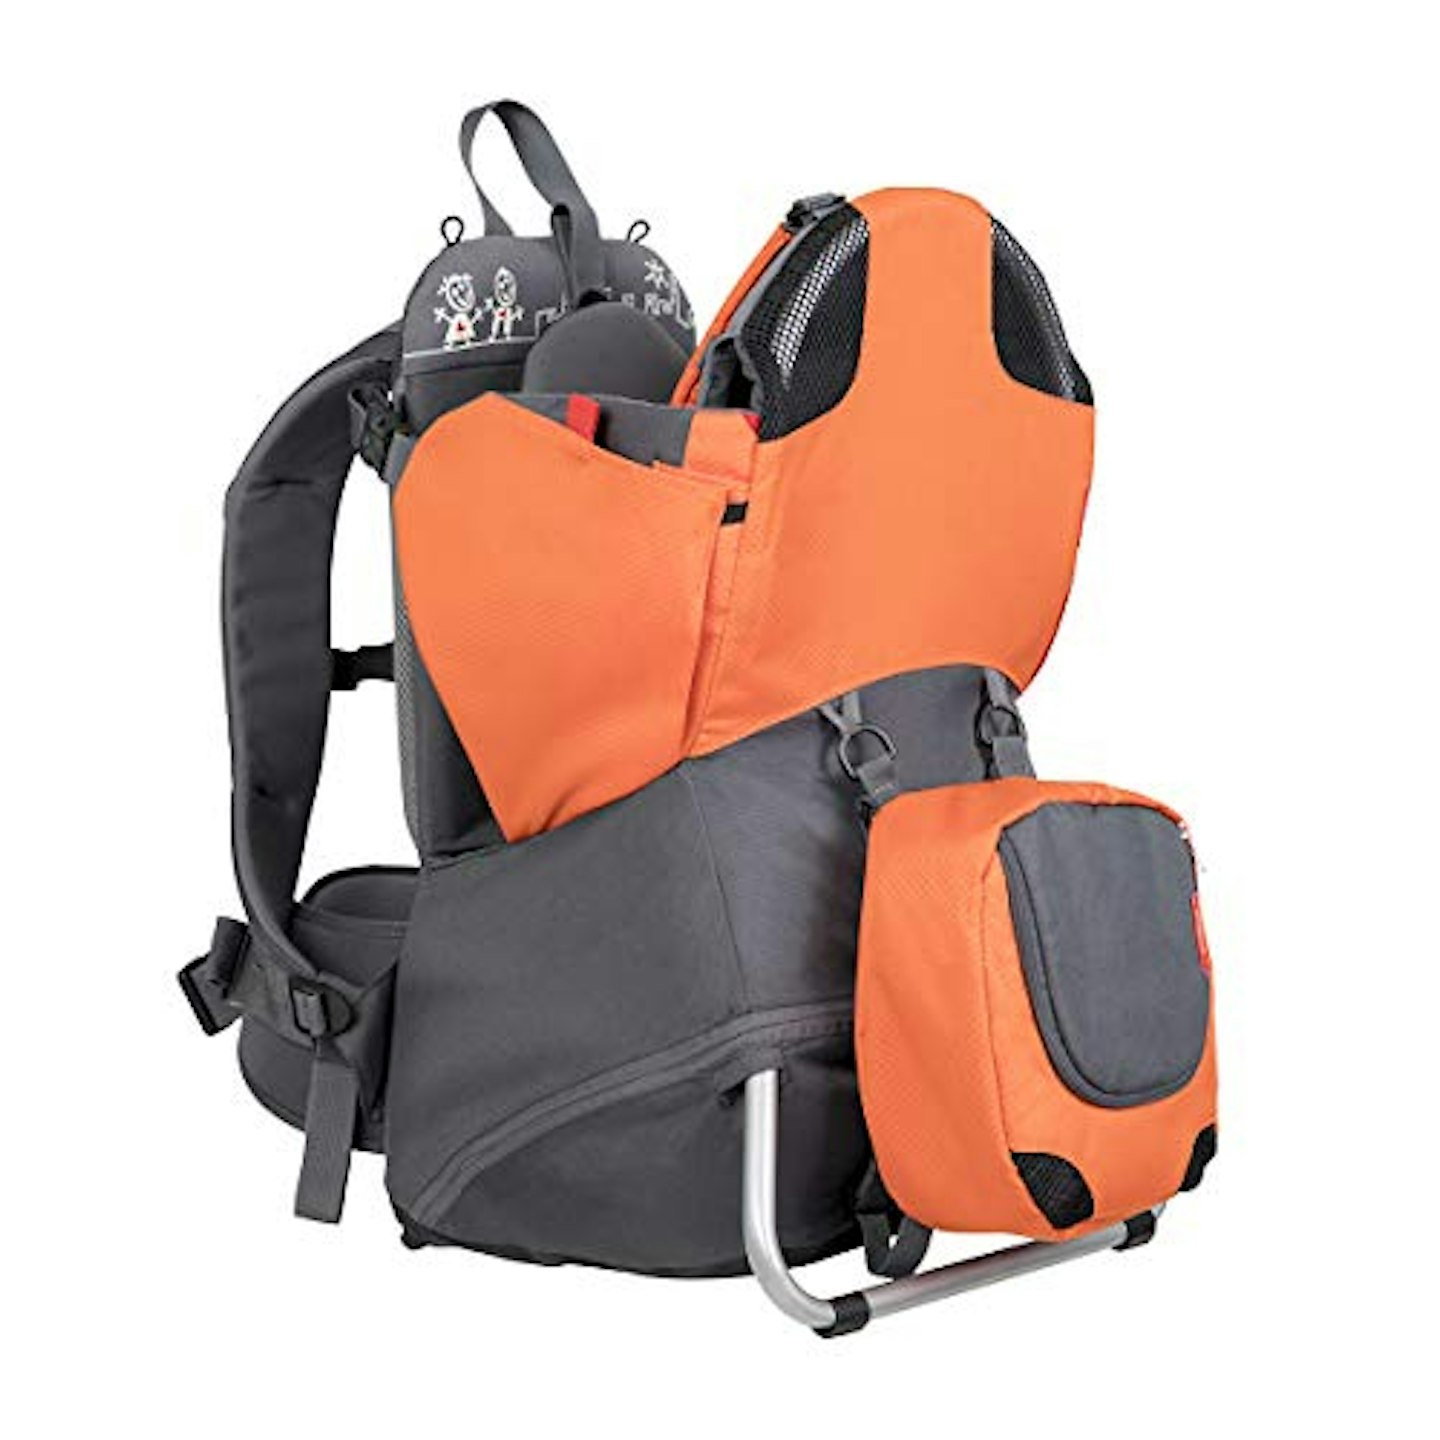 The best baby carrier backpacks: phil&teds Parade Baby Carrier